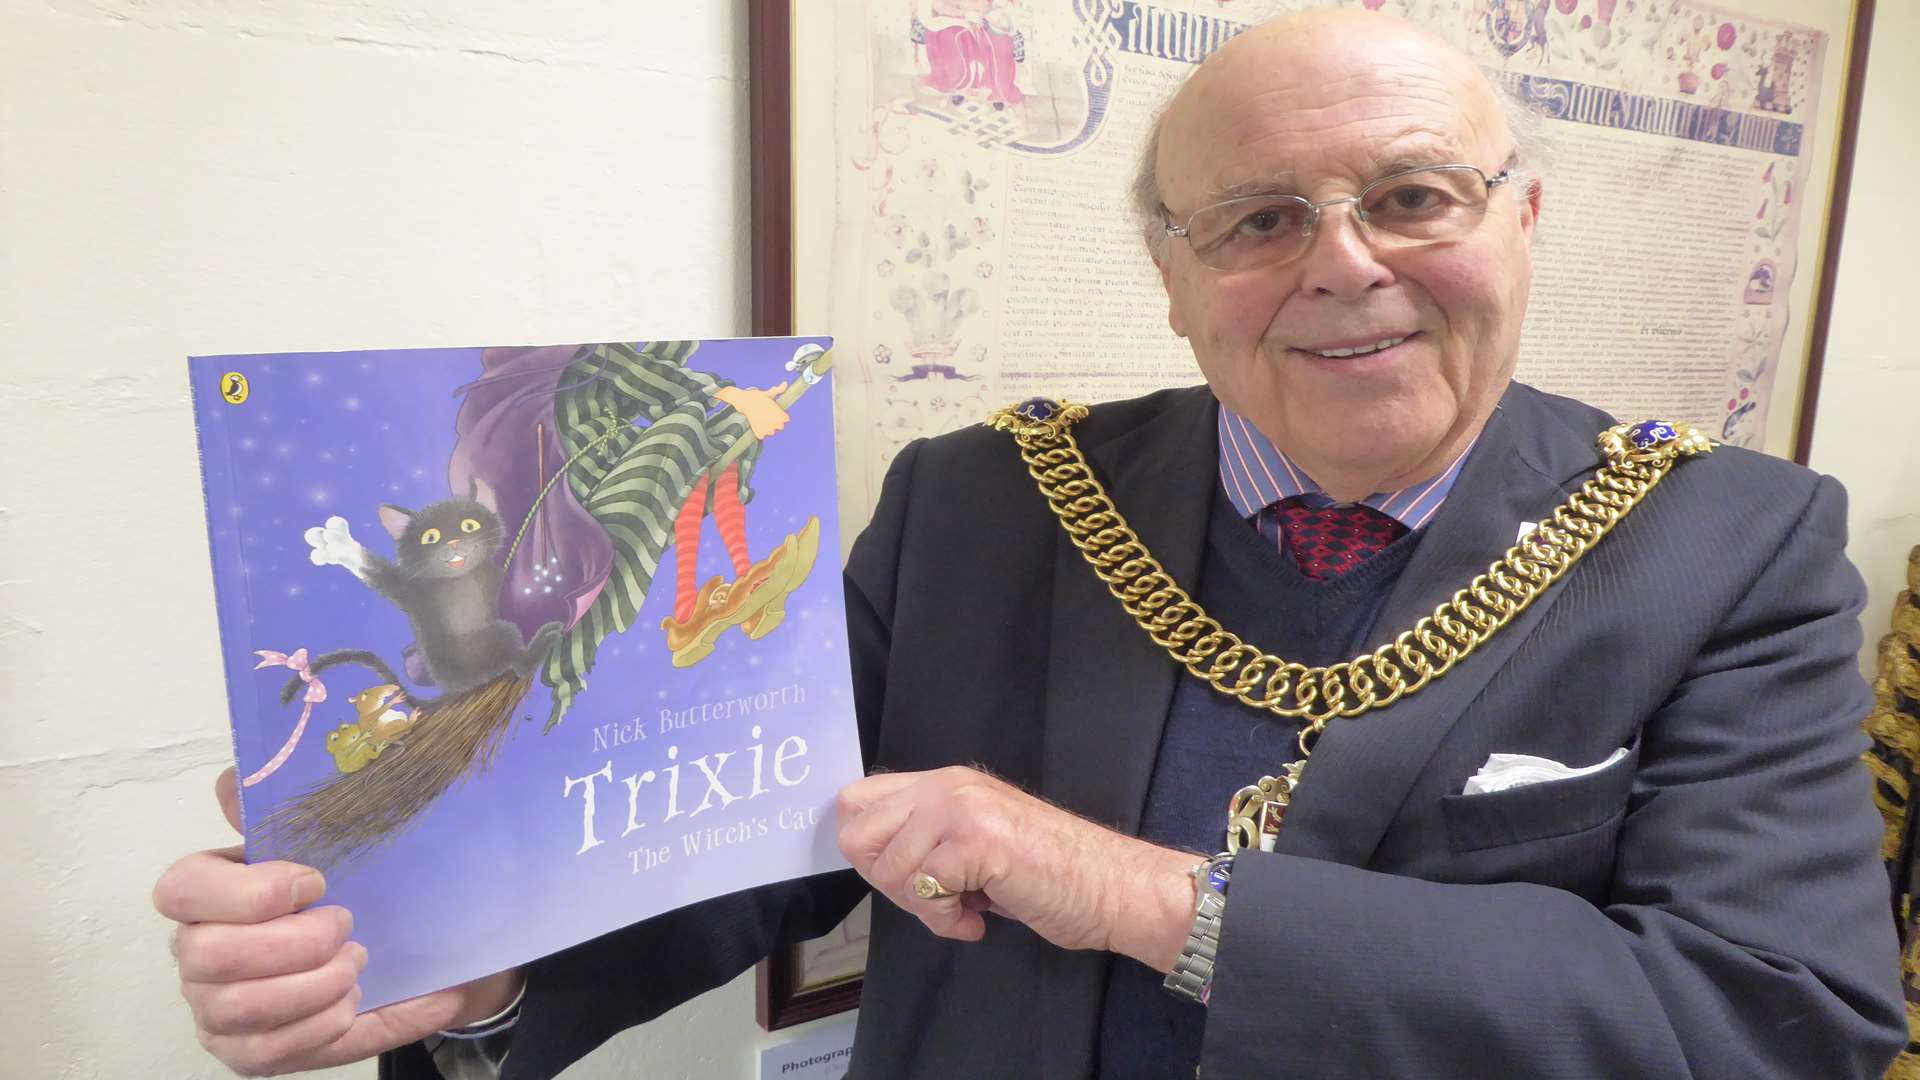 Lord Mayor of Canterbury Cllr George Metcalfe promotes KM Charity Team schools challenge to encourage children to read more and walk to school more.